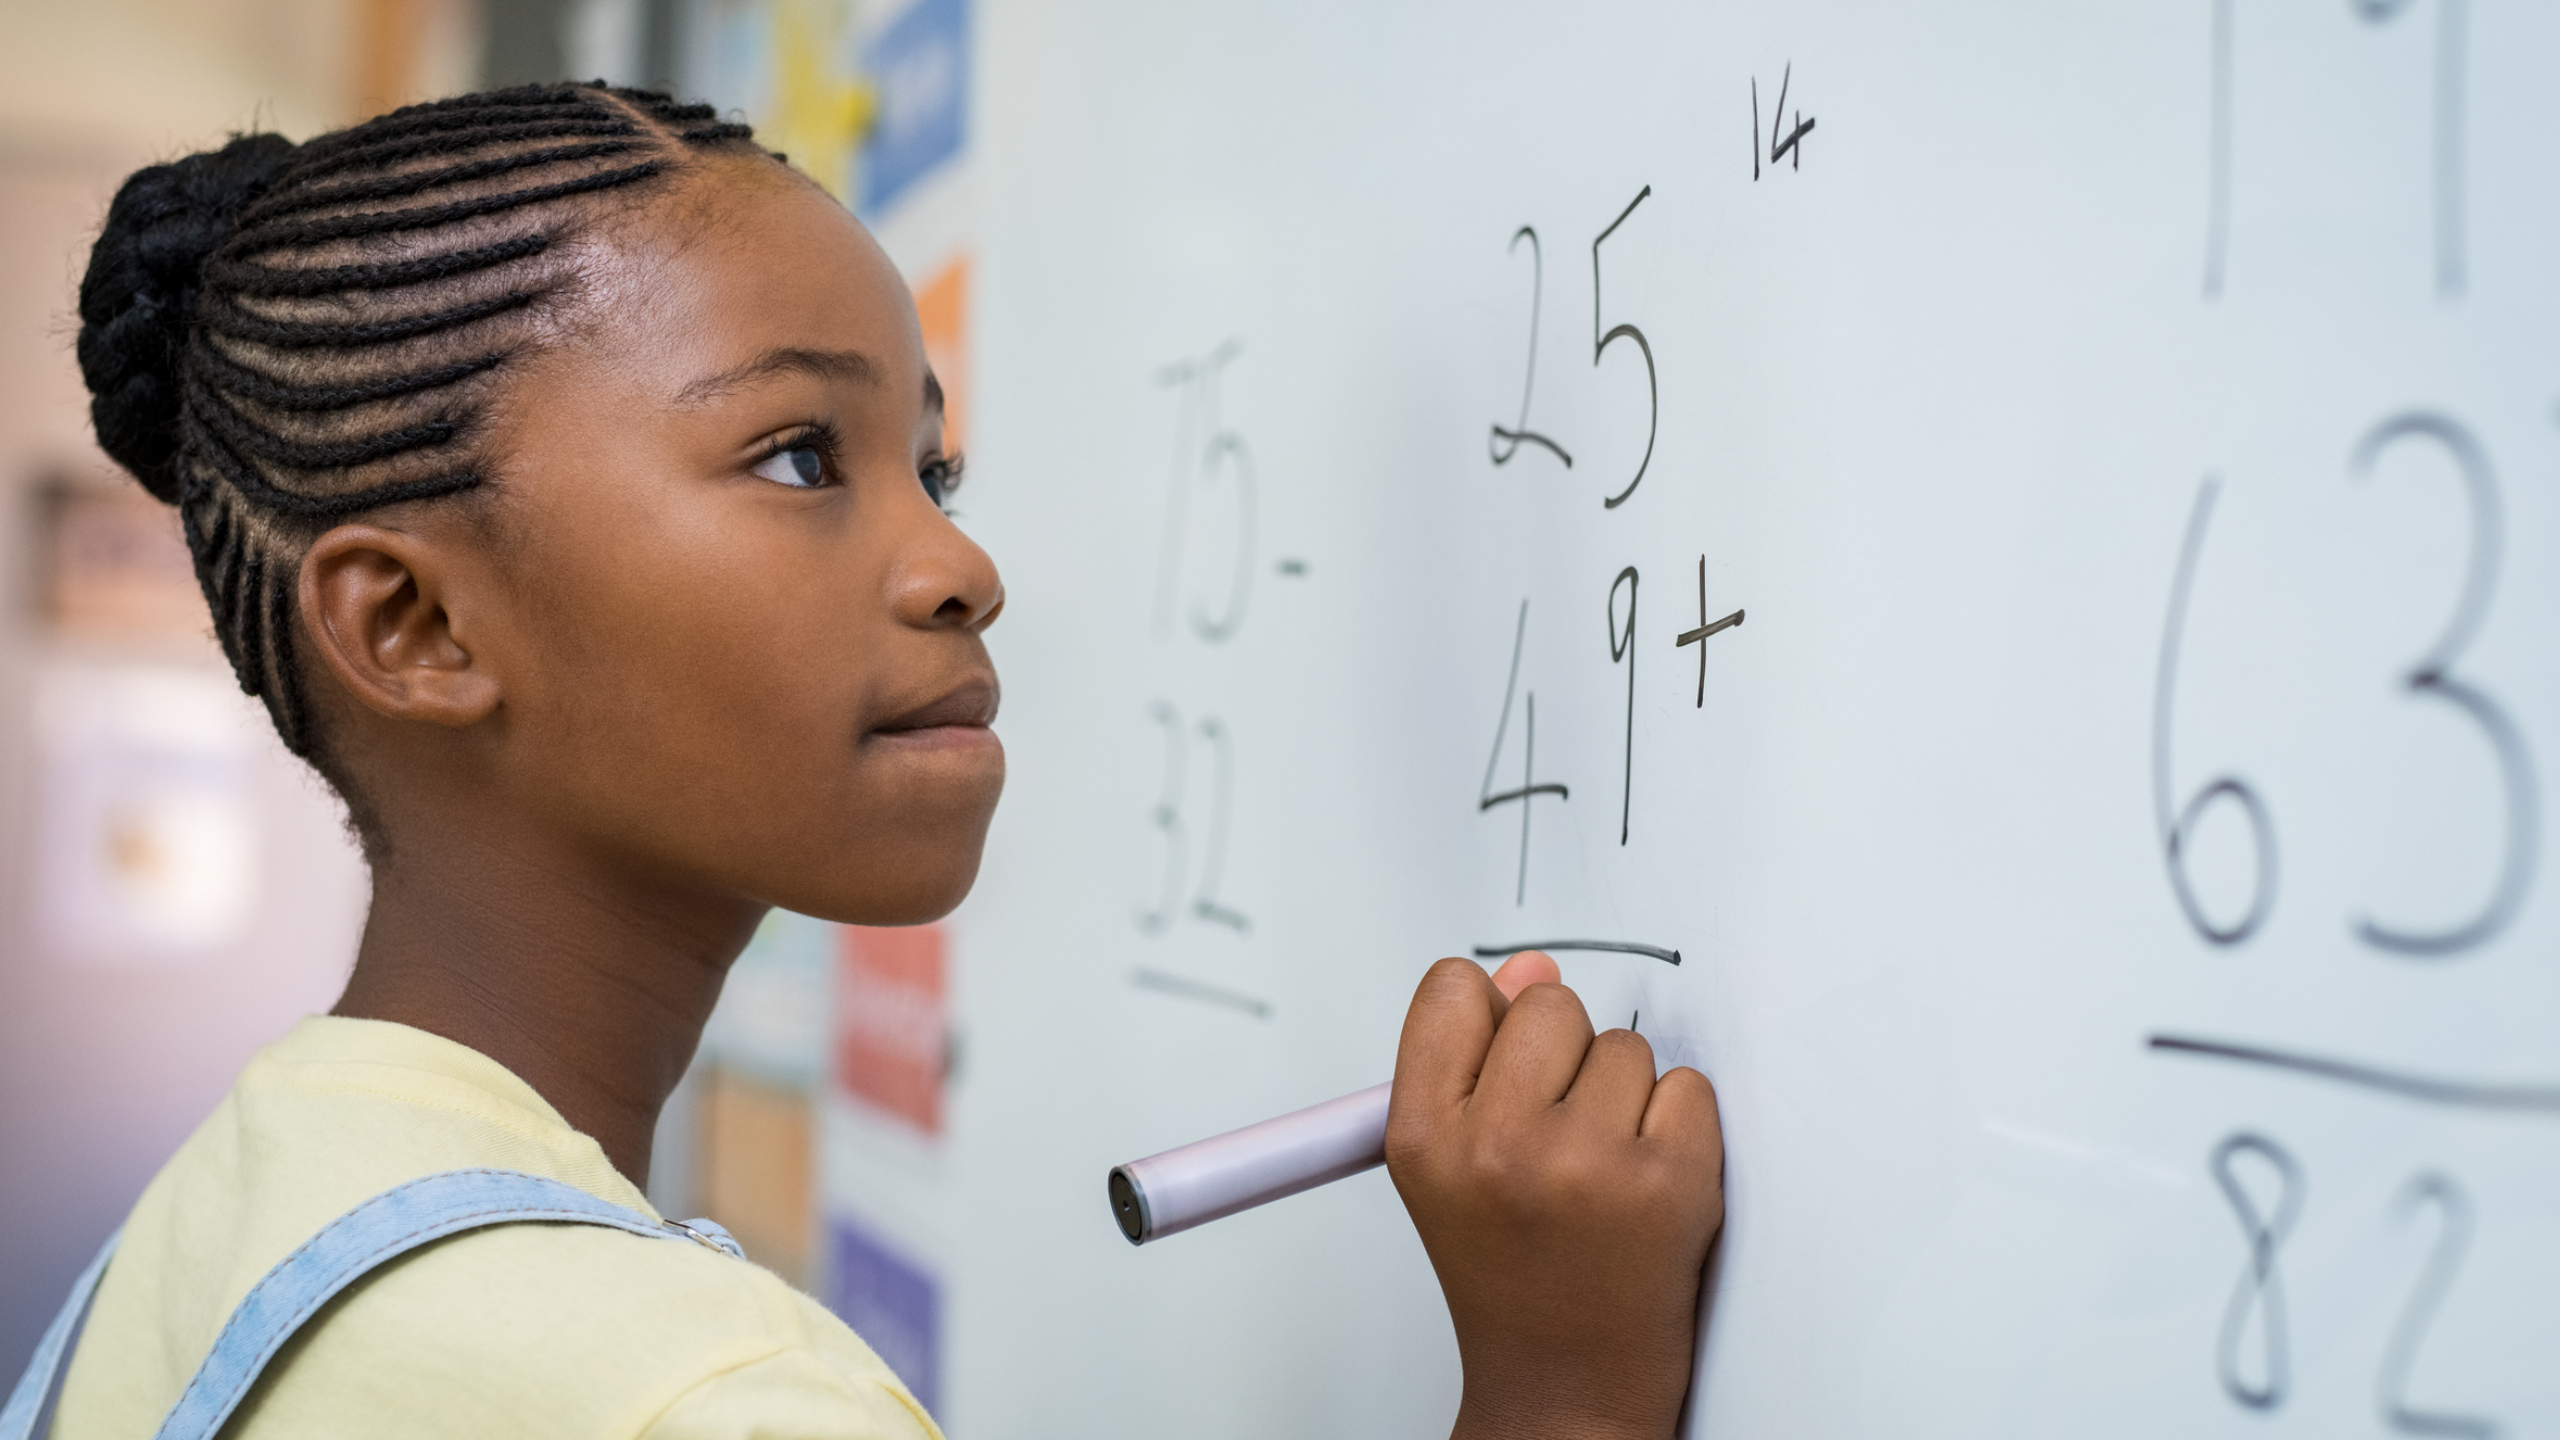 Young girl solving a math problem on a whiteboard